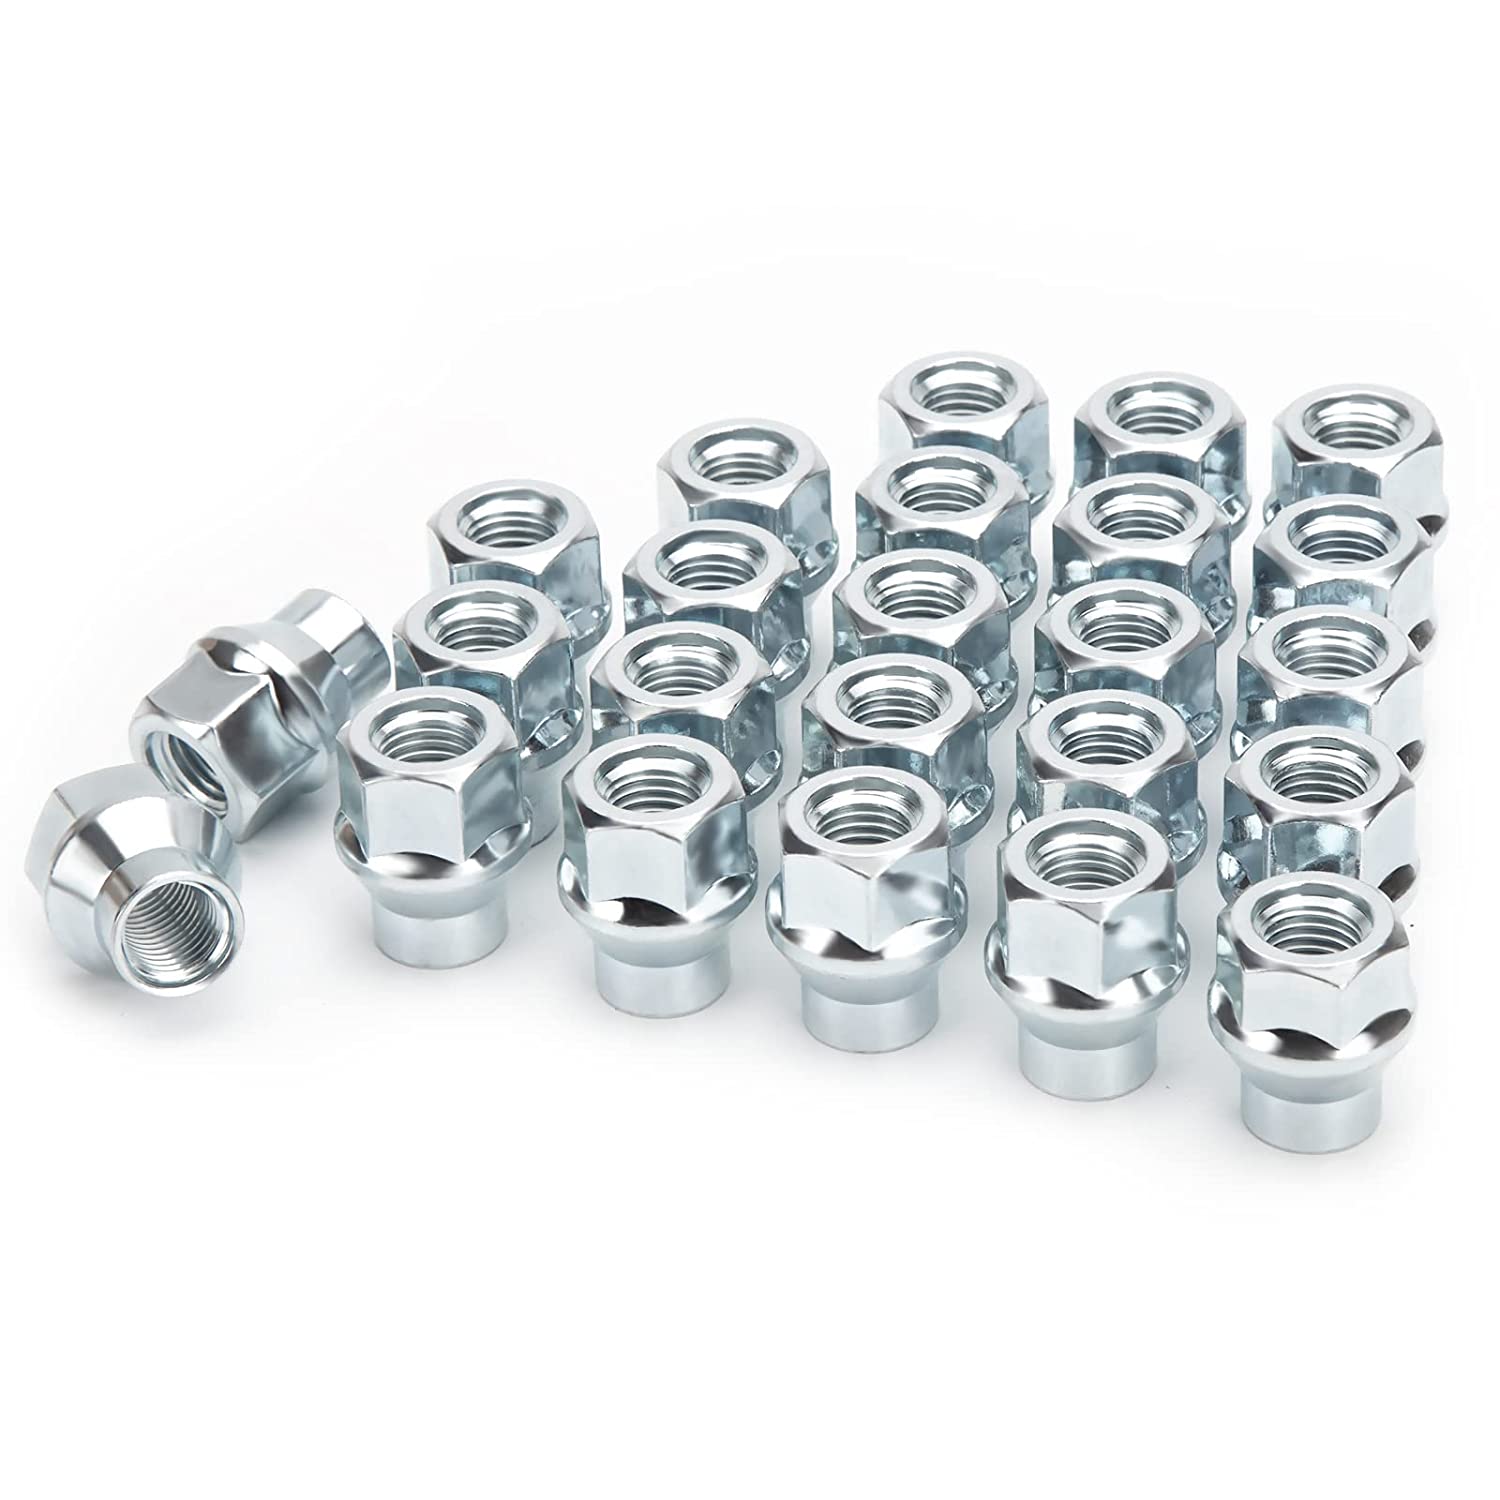 Extened Open End Lug Nuts 12x1.5 24Pcs 7mm Shank For Toyota Lexus